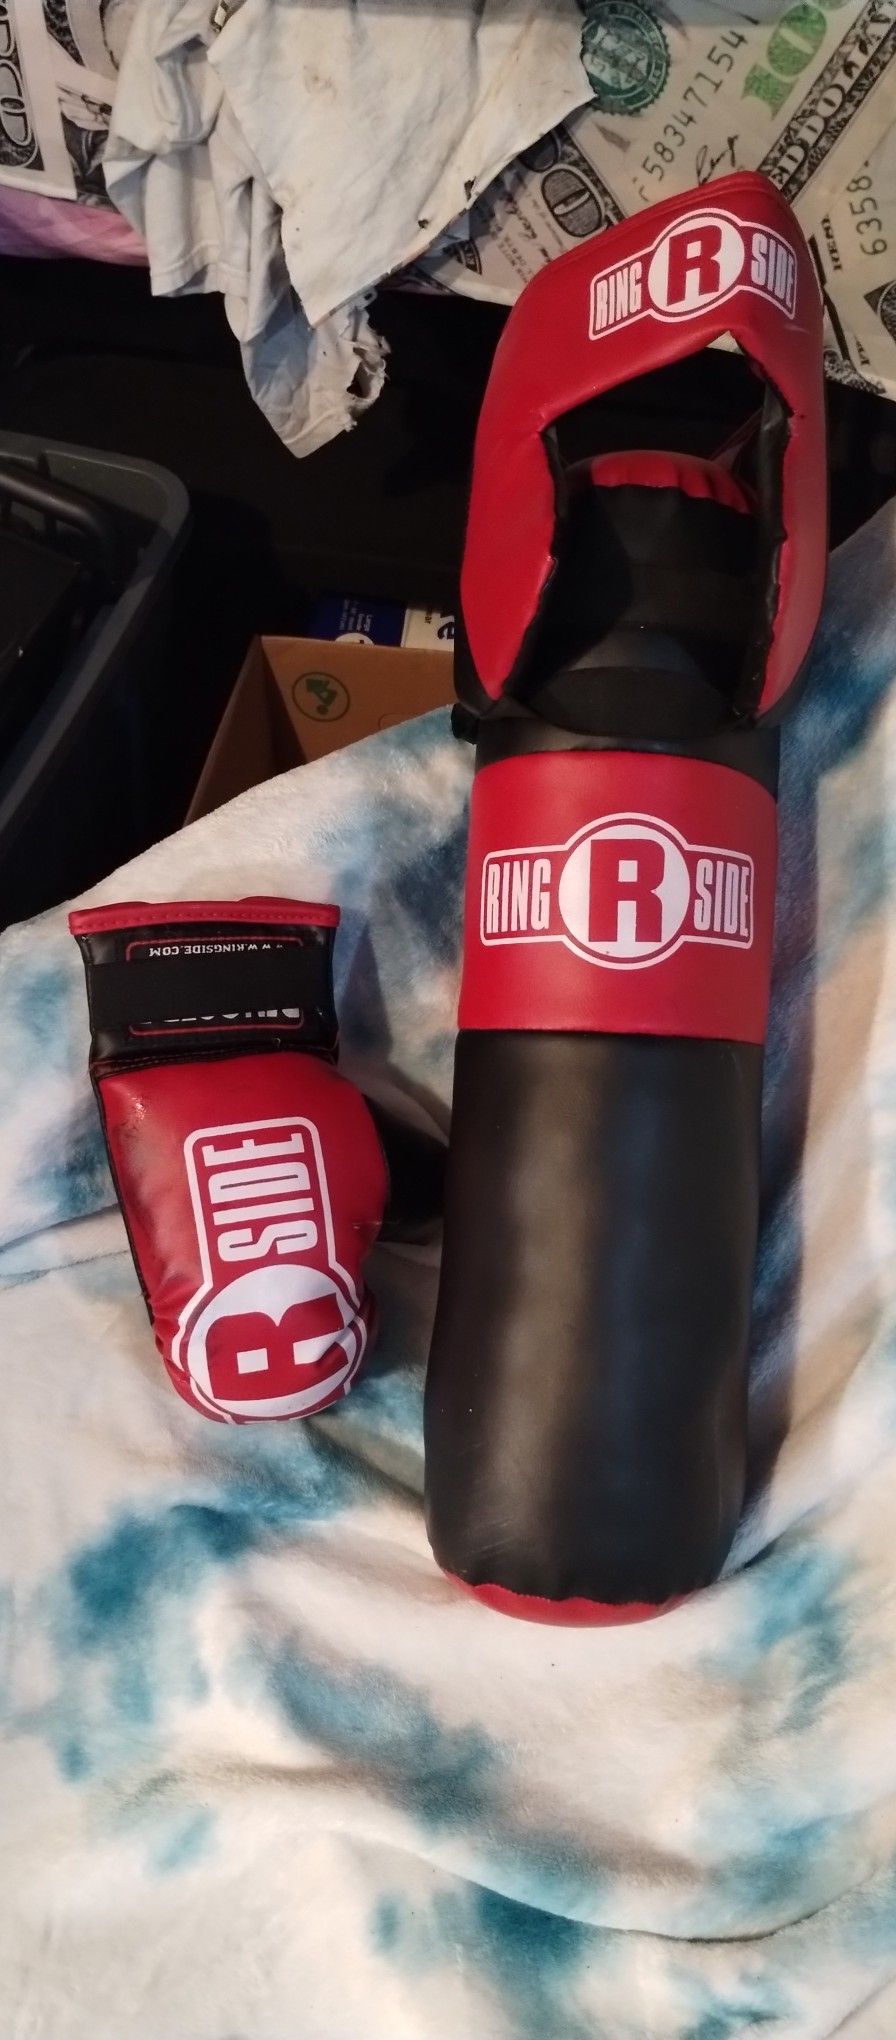 Kids Punching Bag With Glove An Head Gear Protector 